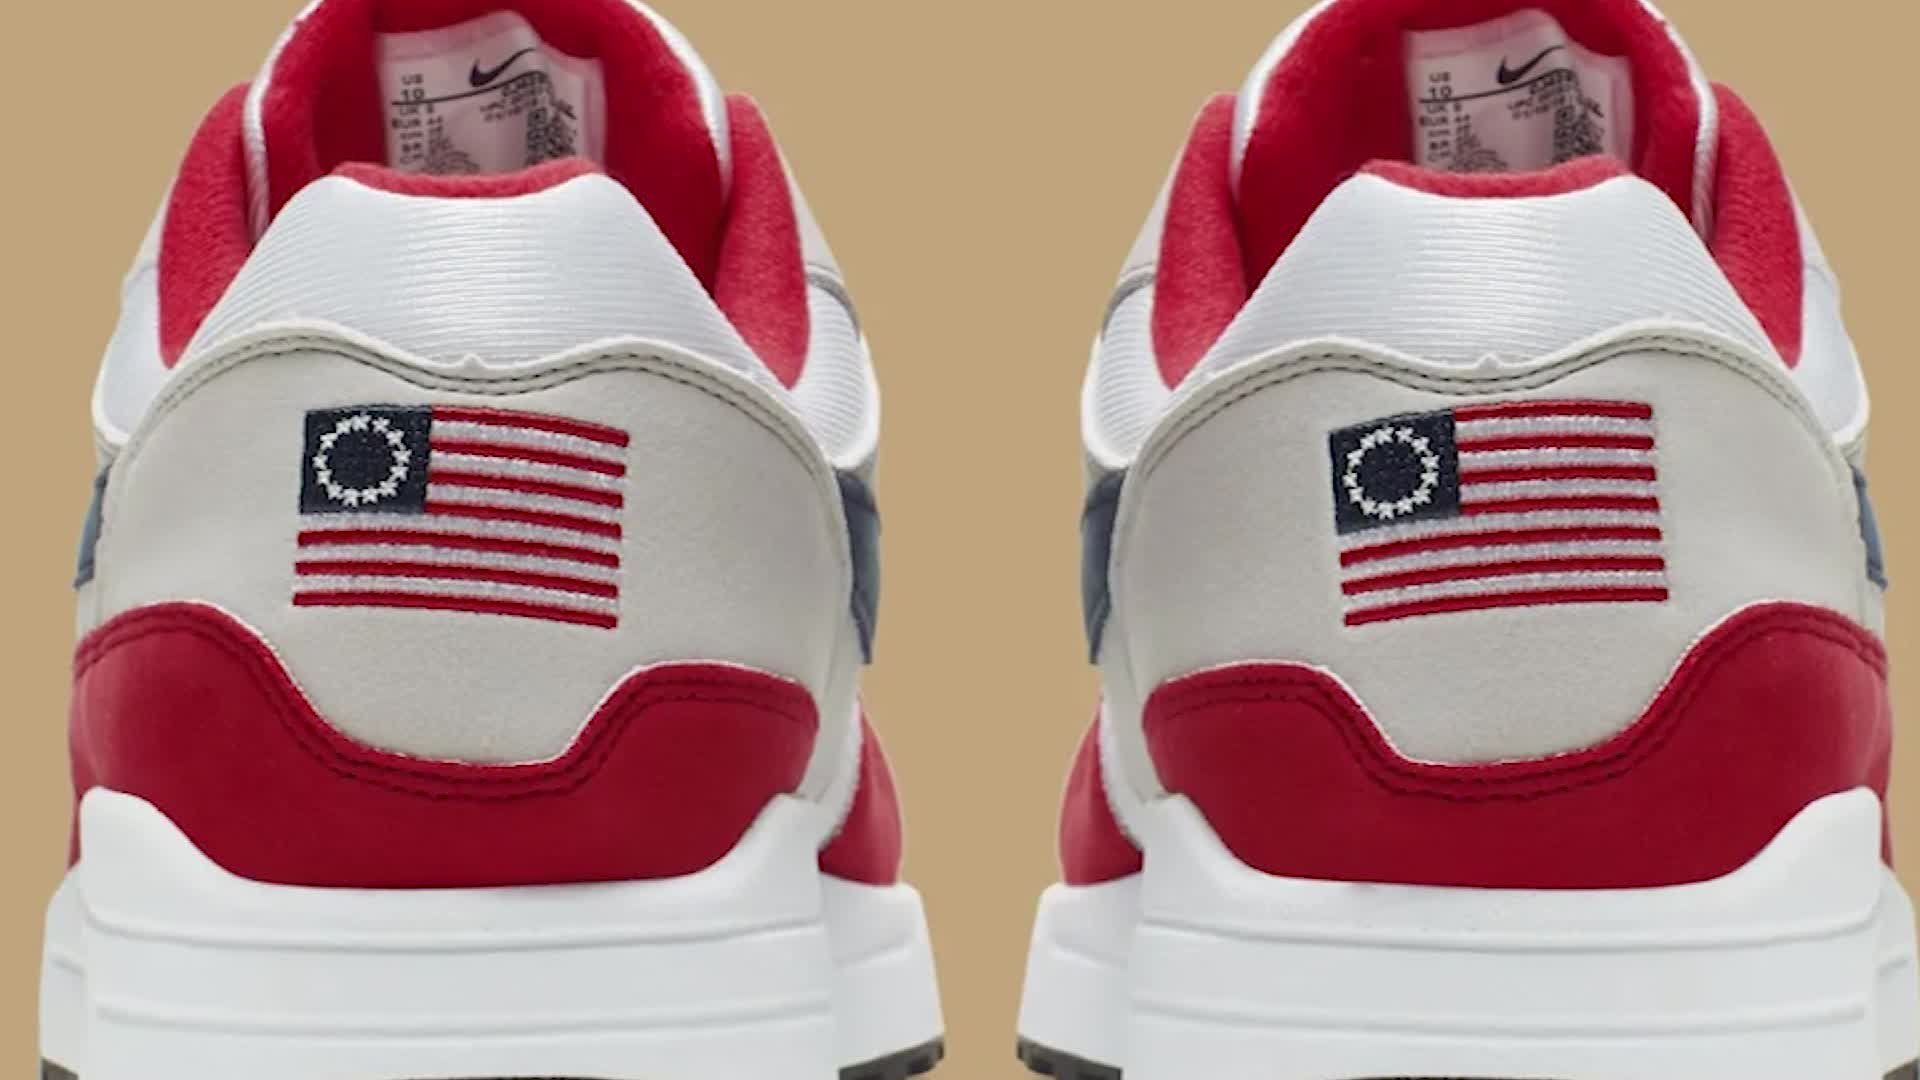 Should Nike recall its Betsy Ross flag 